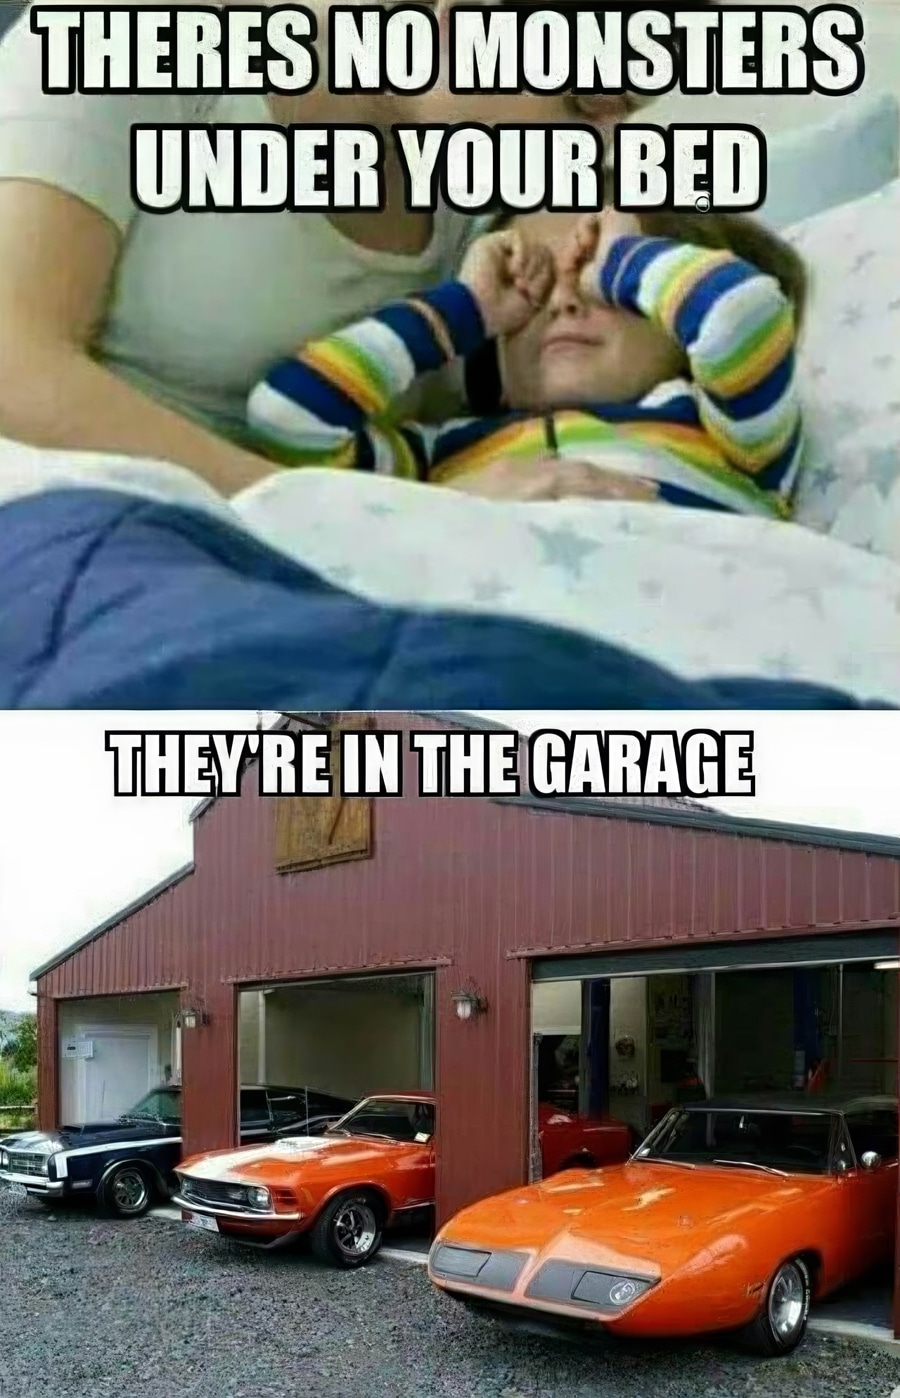 The monsters are in the garage